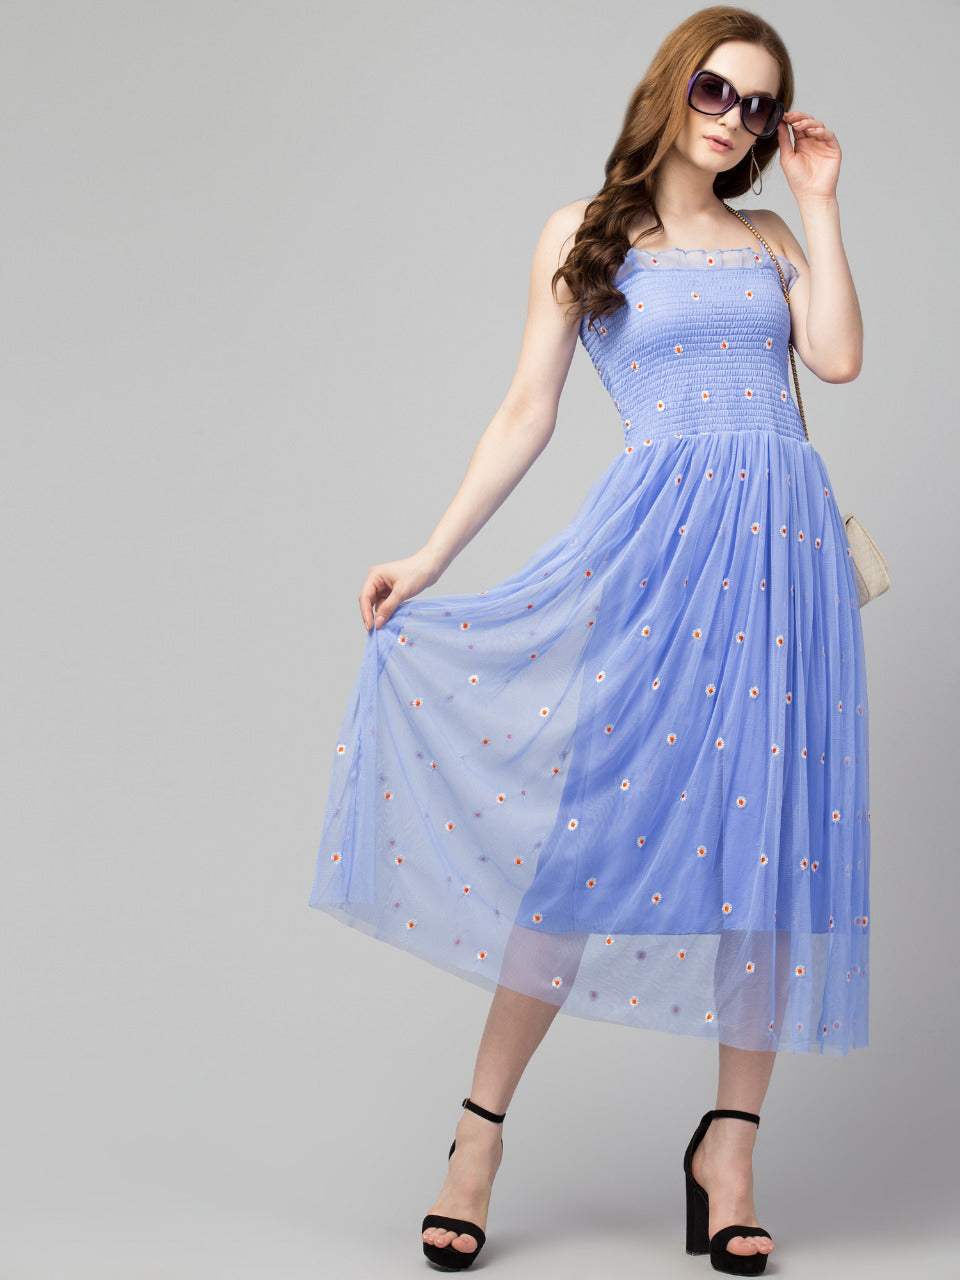 Flower Embroidered Party Dress light blue